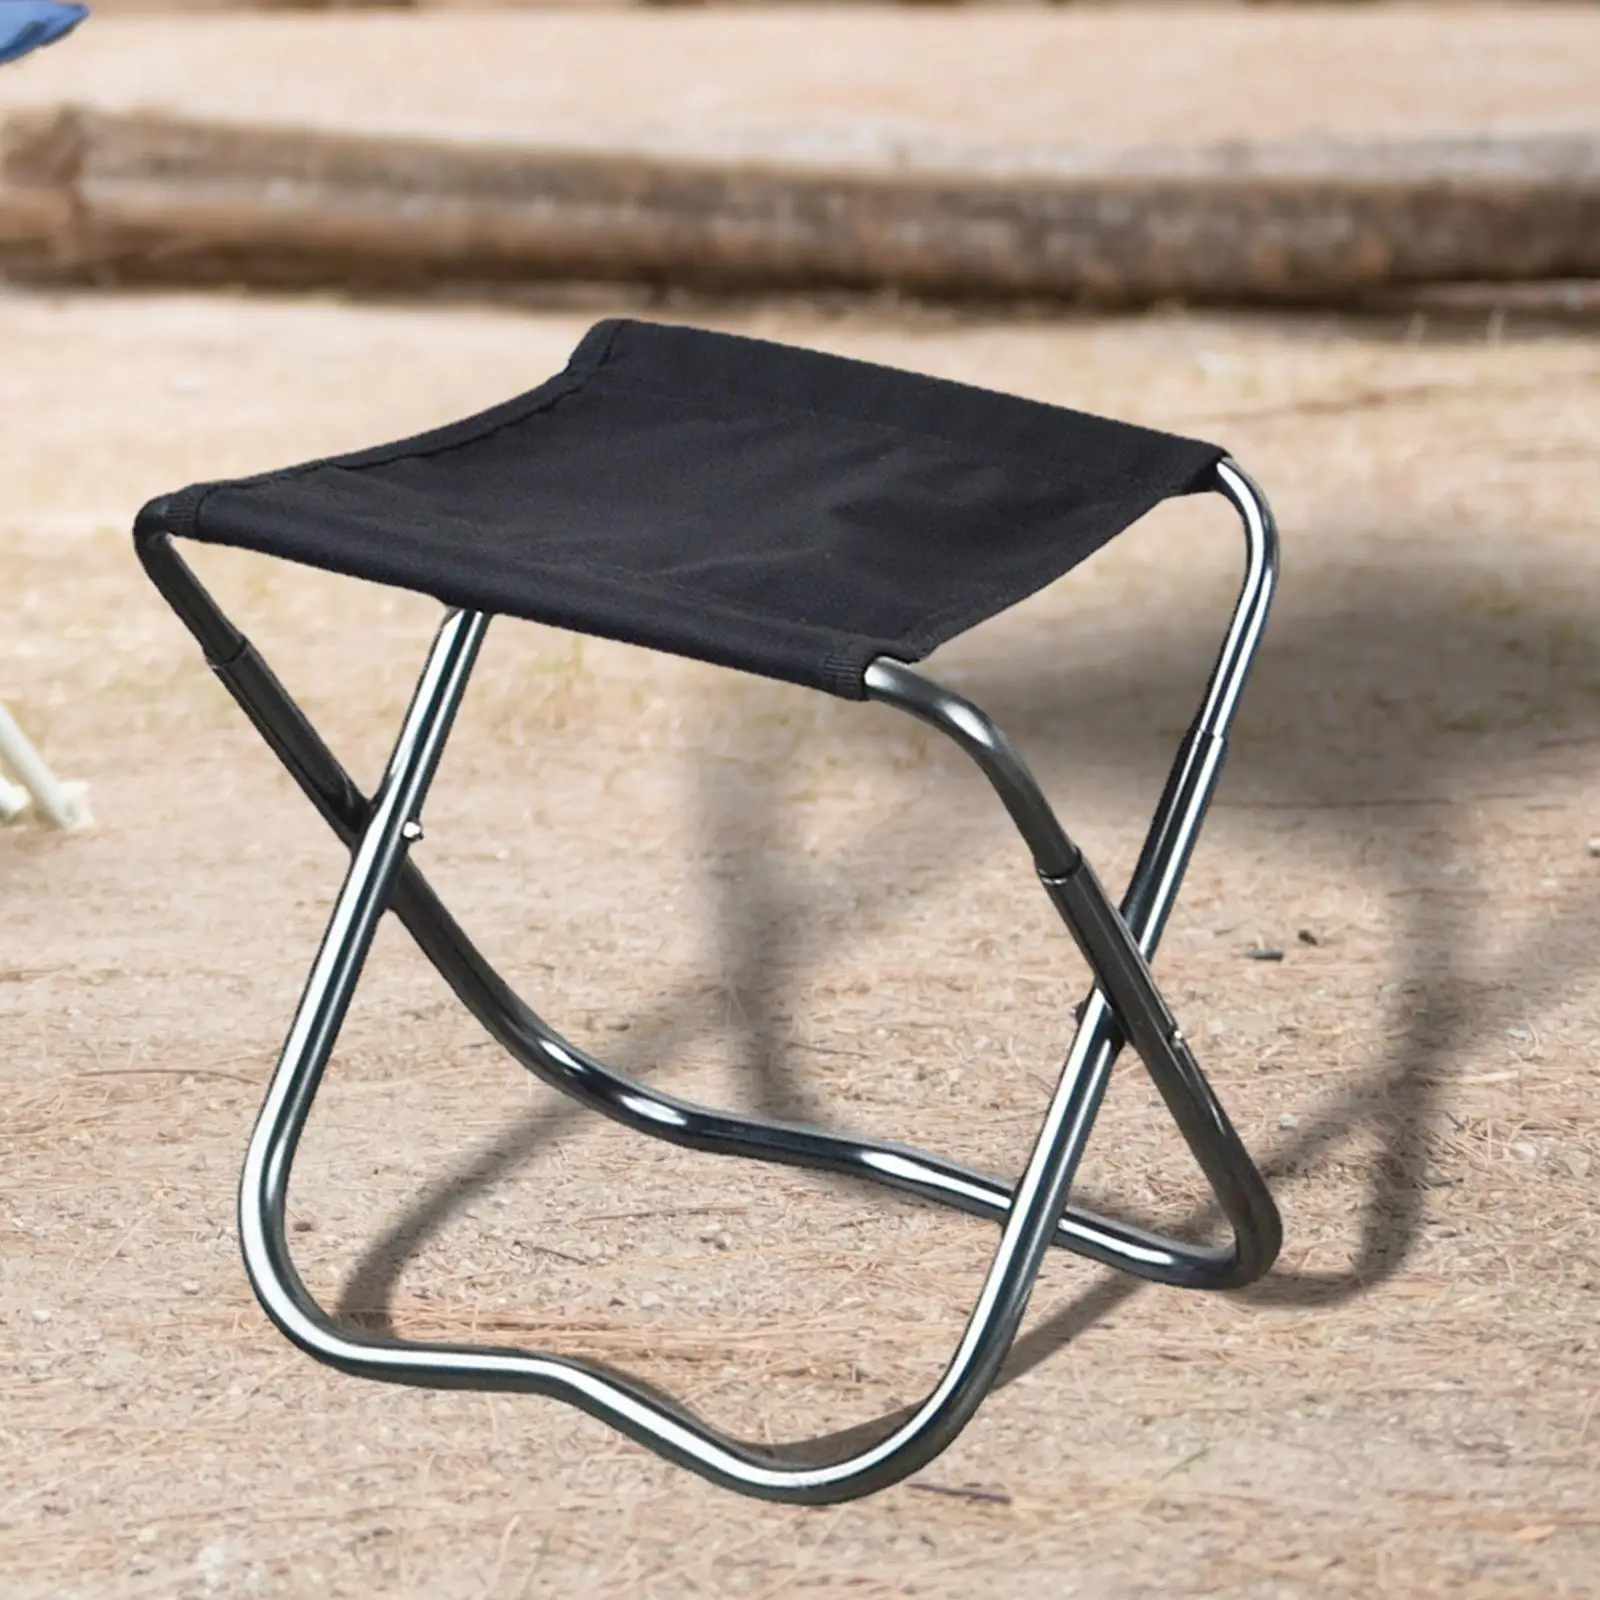 Camping Chairs Wear Resistant Outdoor Camping Stool for Hiking Travel Garden